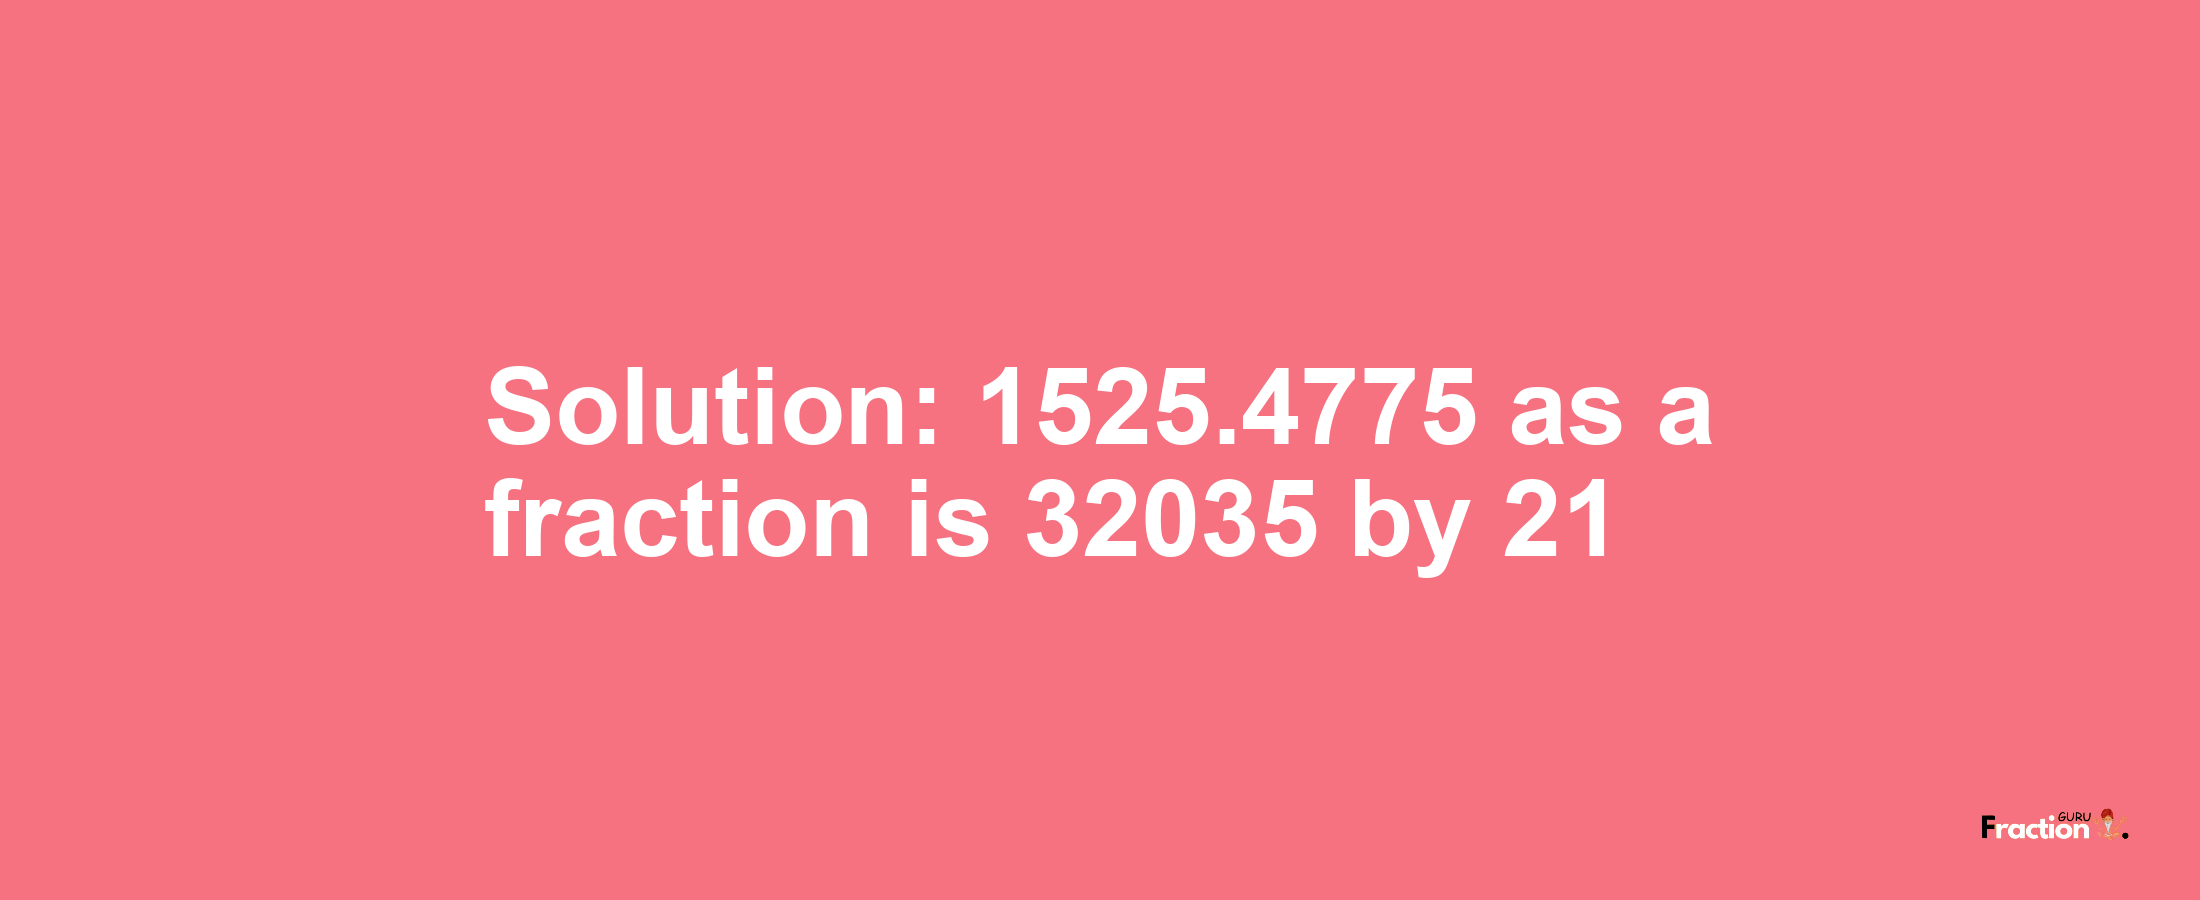 Solution:1525.4775 as a fraction is 32035/21